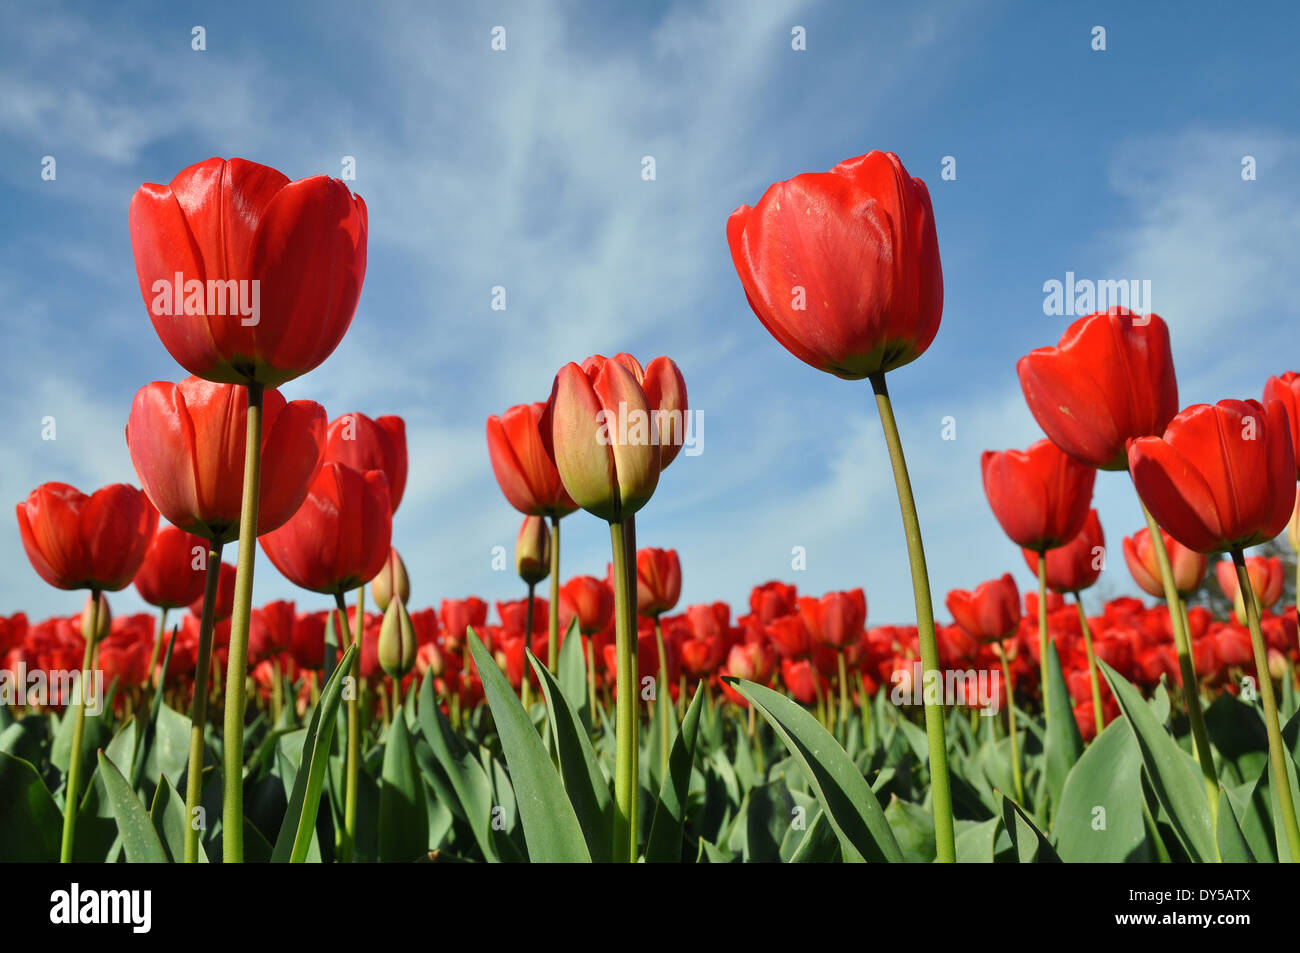 Detail of a field with red tulips, Holland, Netherlands Stock Photo